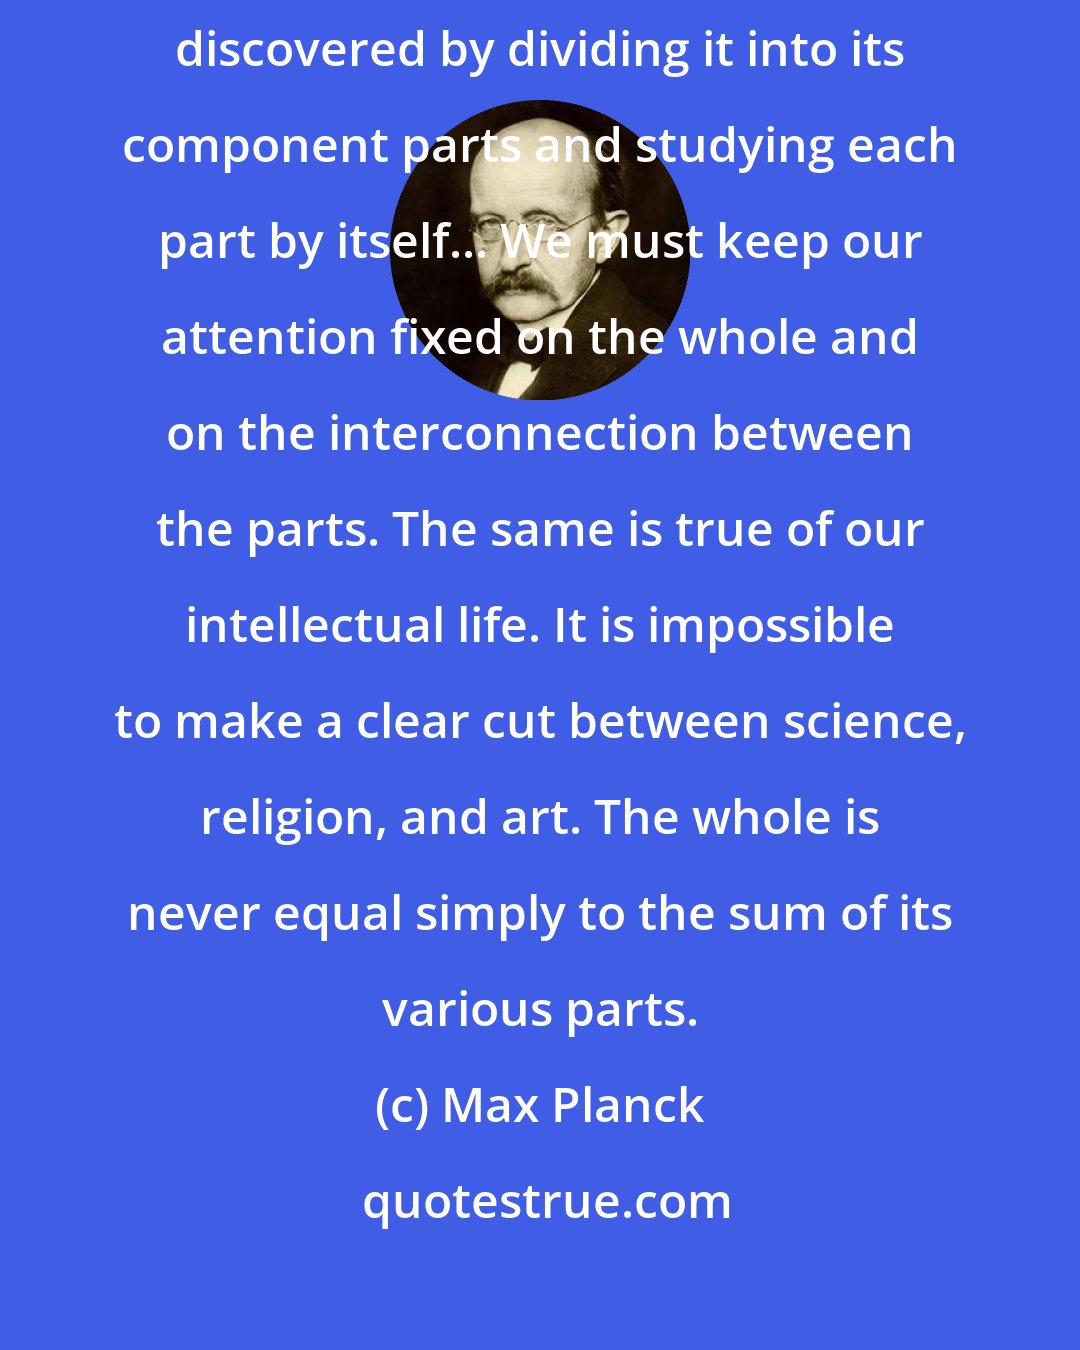 Max Planck: Modern physics has taught us that the nature of any system cannot be discovered by dividing it into its component parts and studying each part by itself... We must keep our attention fixed on the whole and on the interconnection between the parts. The same is true of our intellectual life. It is impossible to make a clear cut between science, religion, and art. The whole is never equal simply to the sum of its various parts.